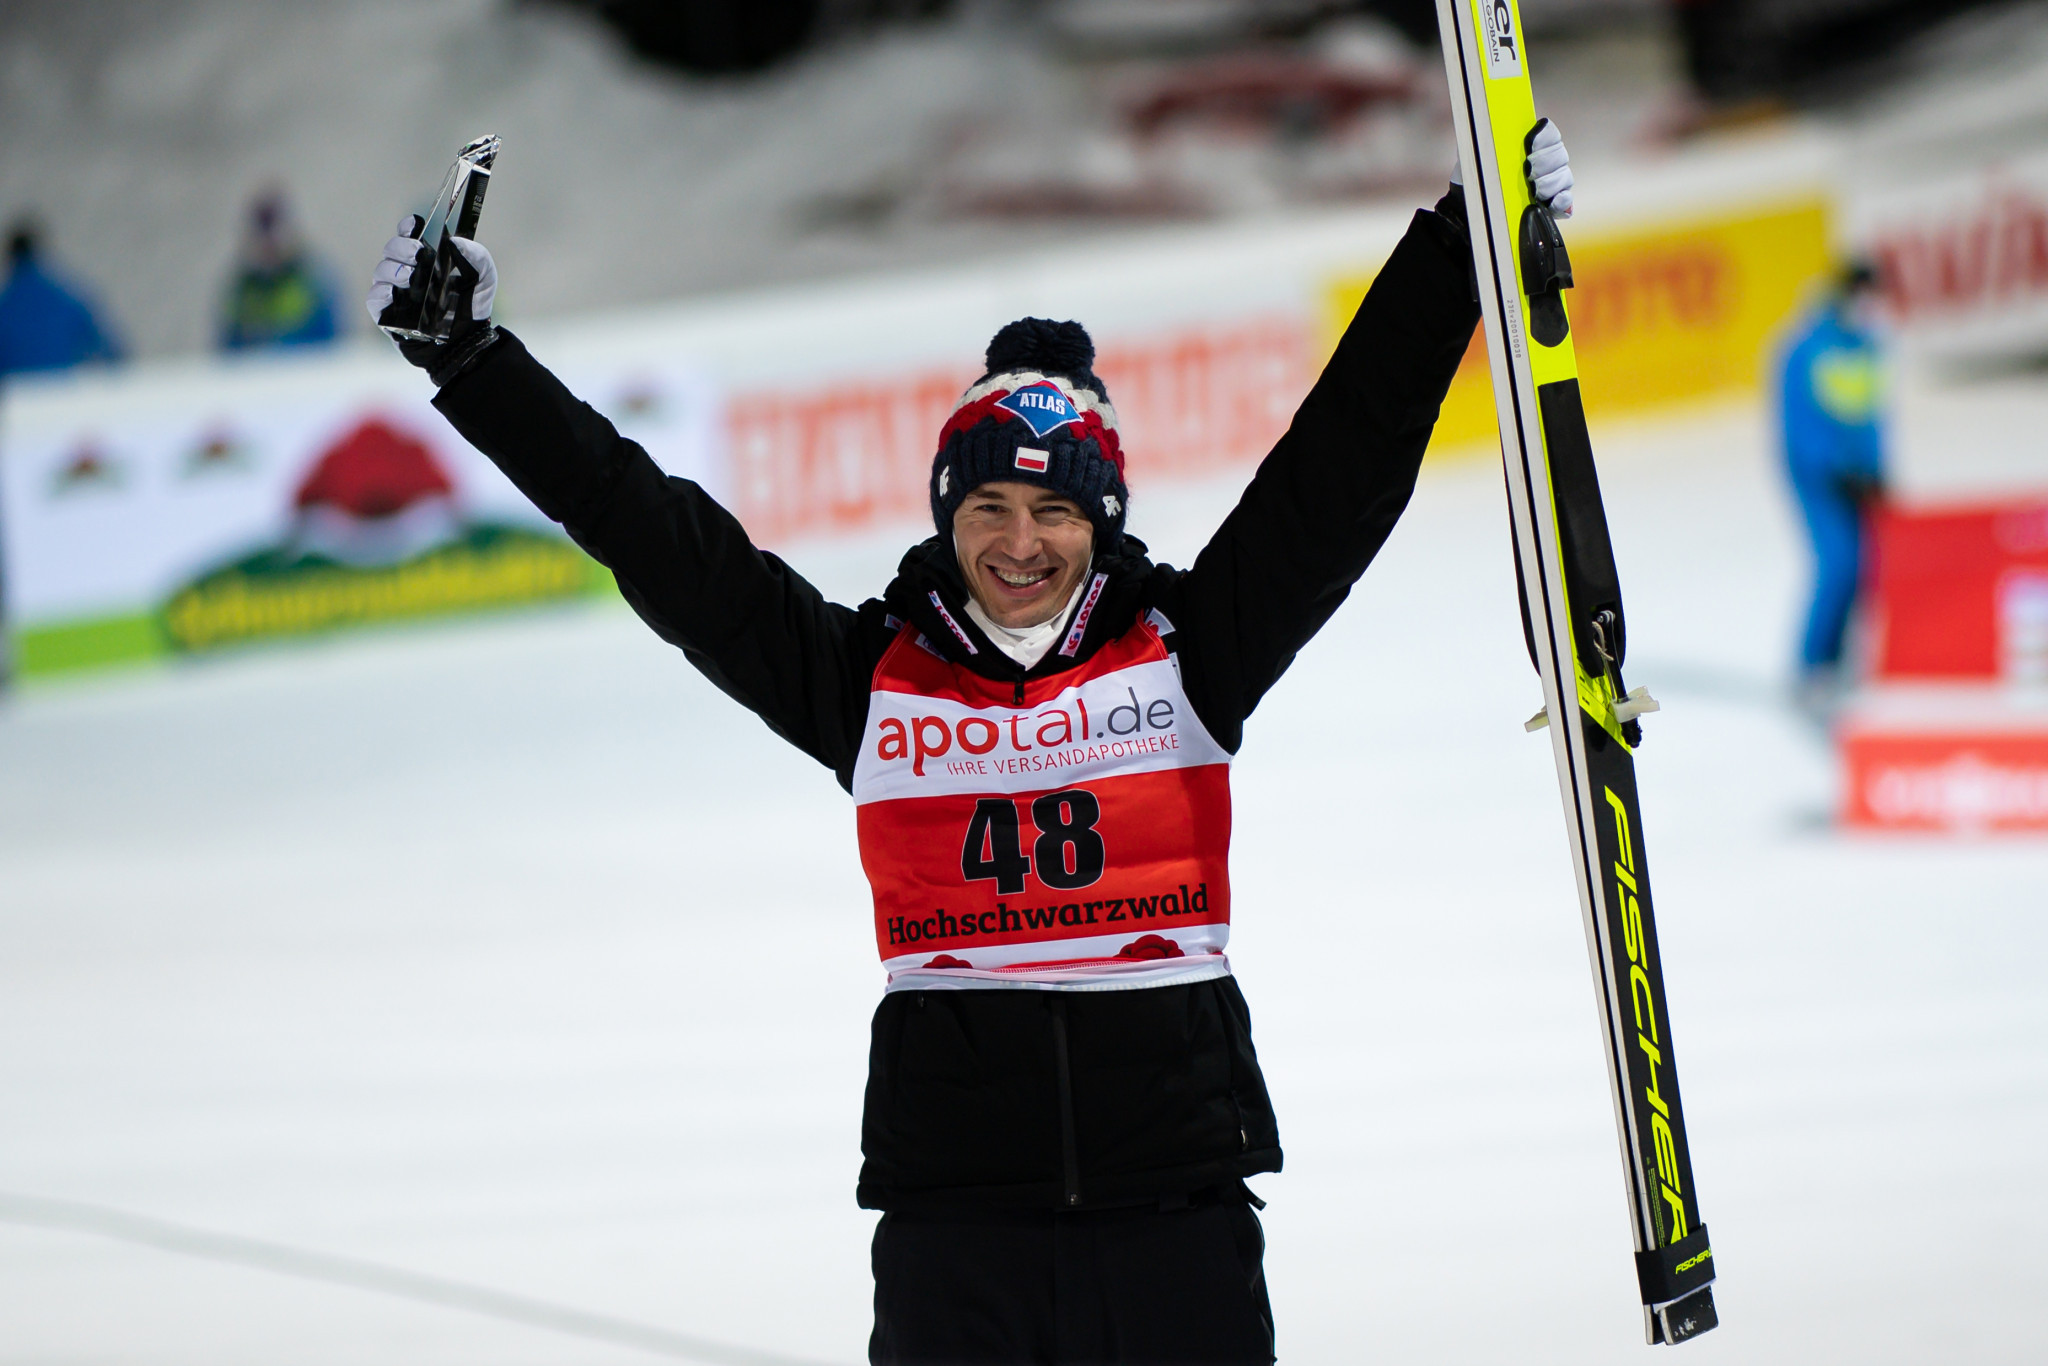 Stoch wins third event in a row at FIS Ski Jumping World Cup in Titisee-Neustadt